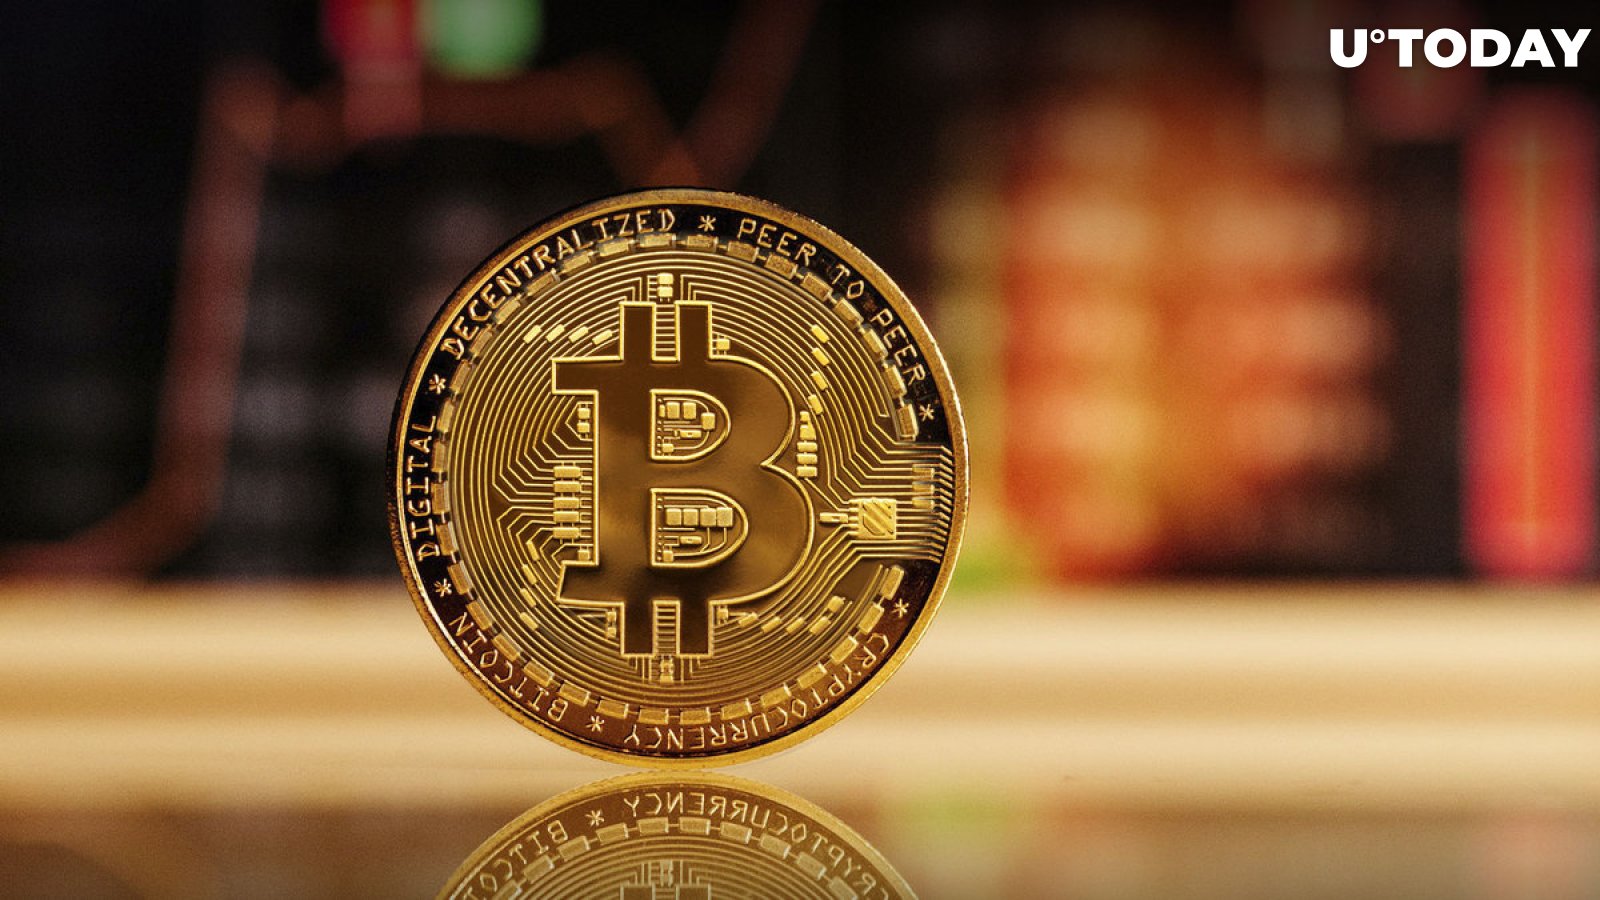 Bitcoin (BTC) May Get Down to $22,300 Before Jumping Again, Here's Why It's Good: Prominent Analyst